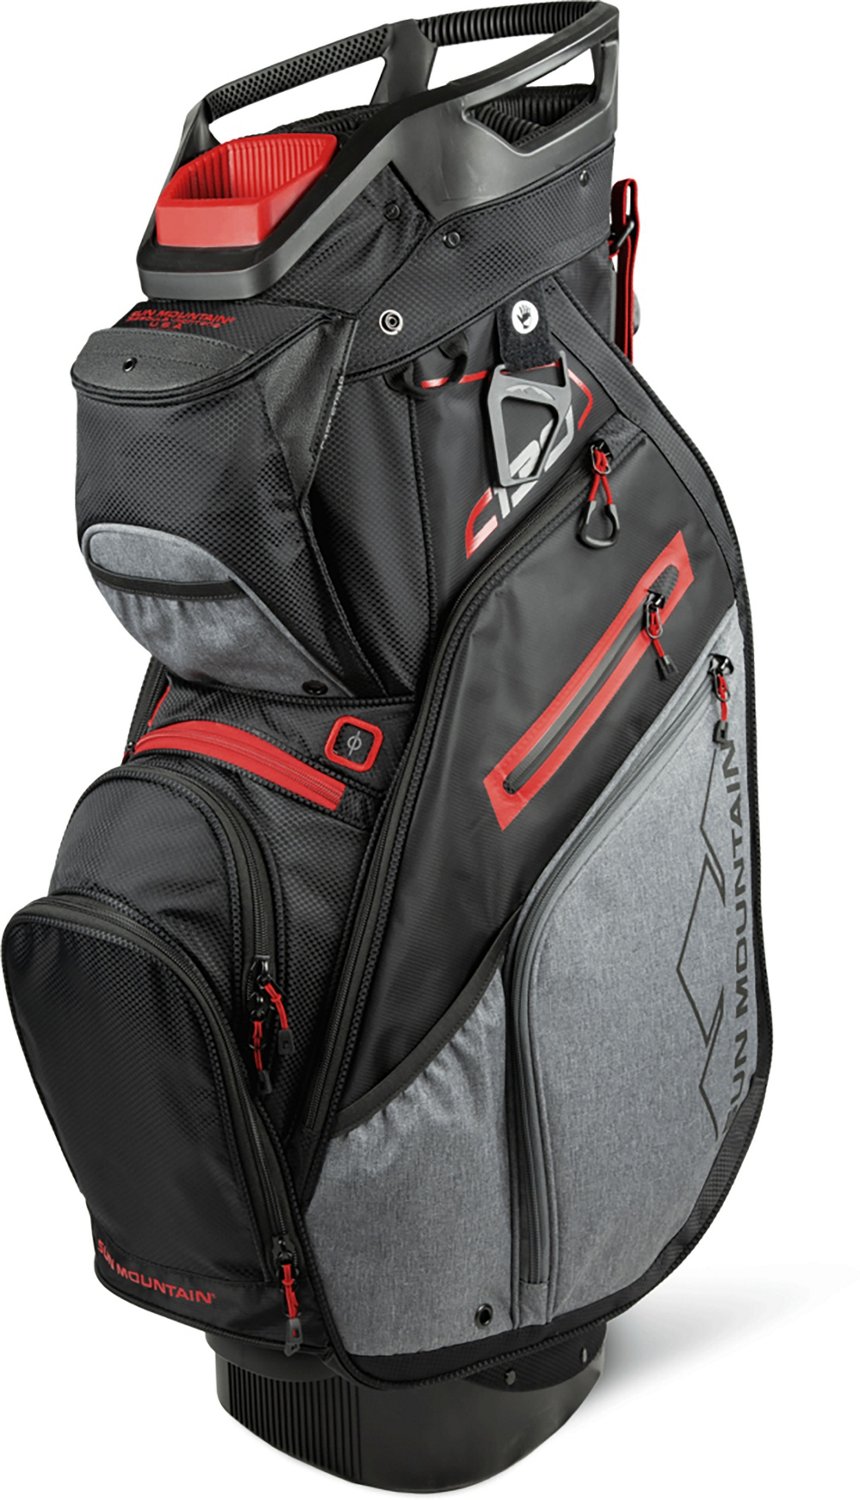 st louis blues golf bags clearance